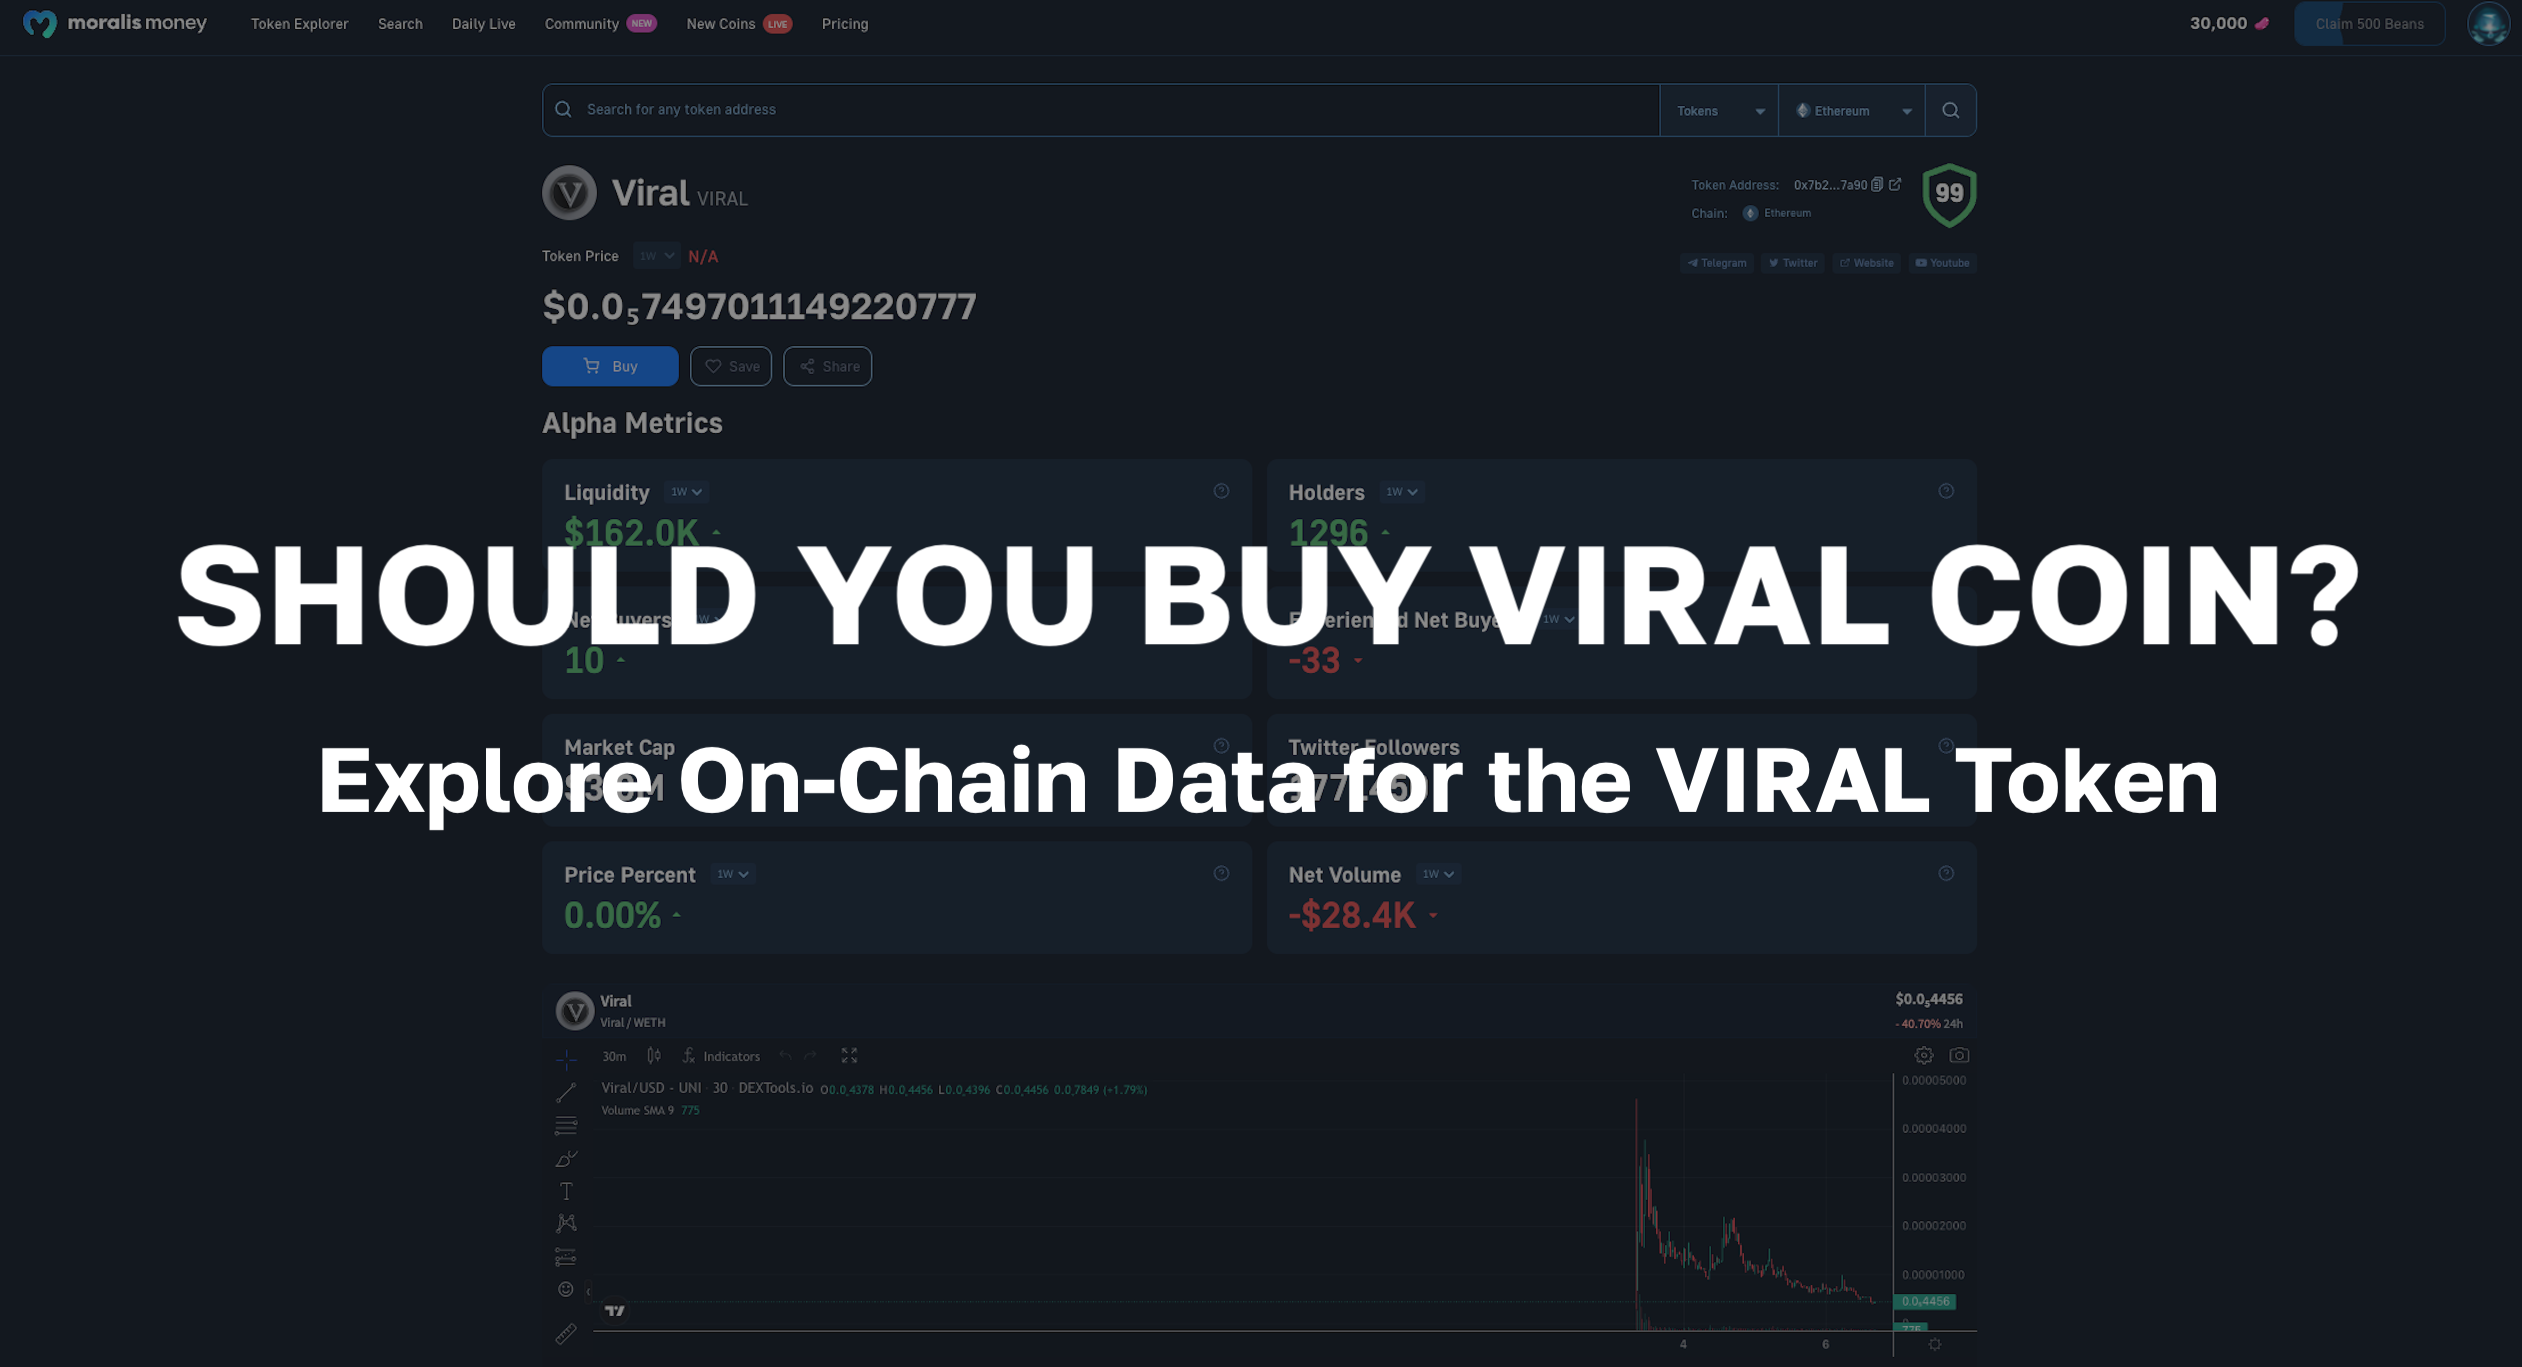 Should You Buy Viral Coin? Explore On-Chain Data for the VIRAL Coin